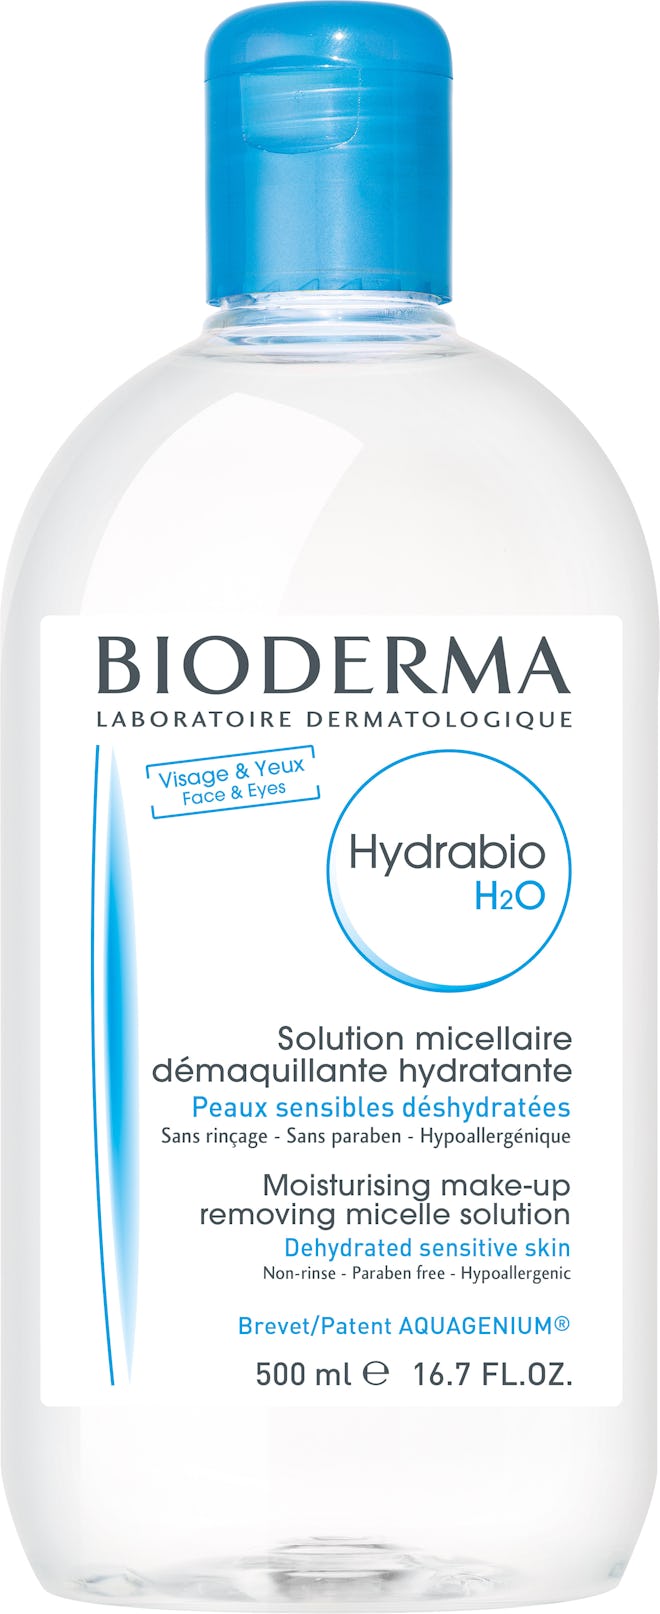 Hydrabio H2O Micellar Cleansing Water and Makeup Remover Solution for Dehydrated or Sensitive Skin